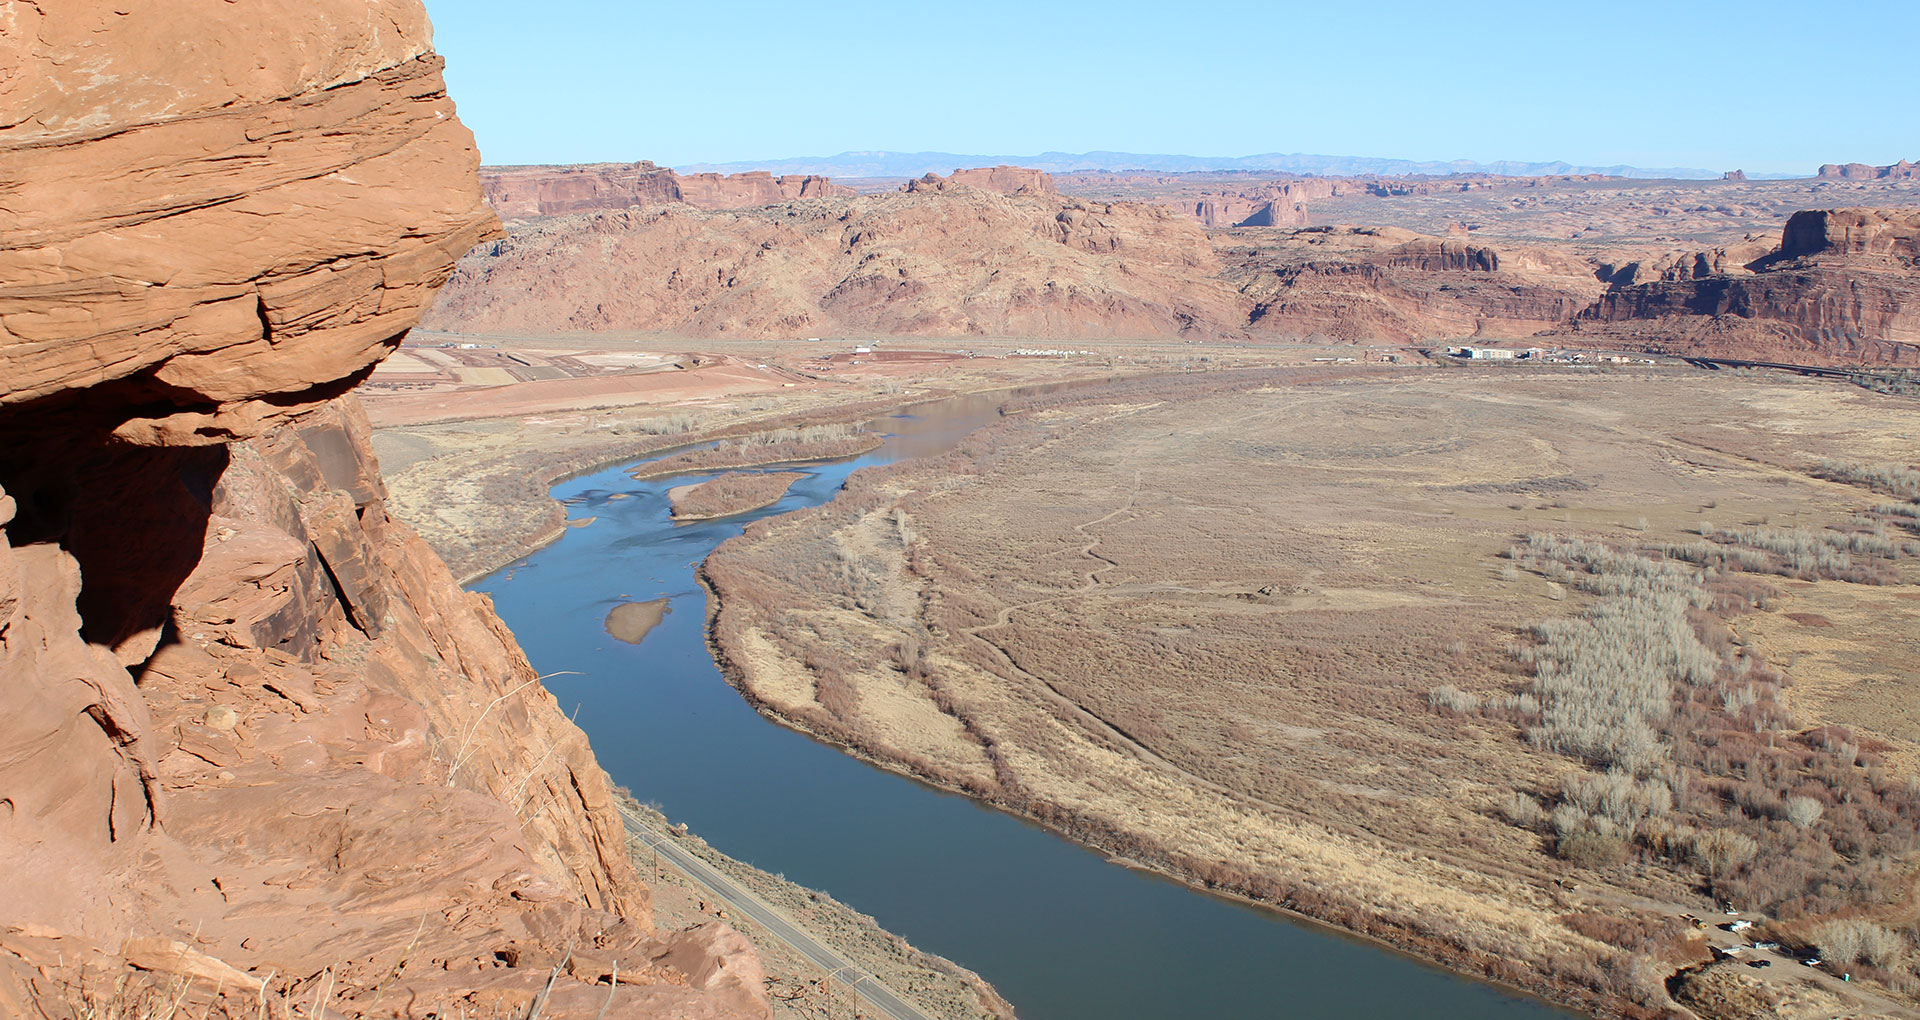 This stretch of the Colorado River near Moab, Utah is currently in extreme drought. 